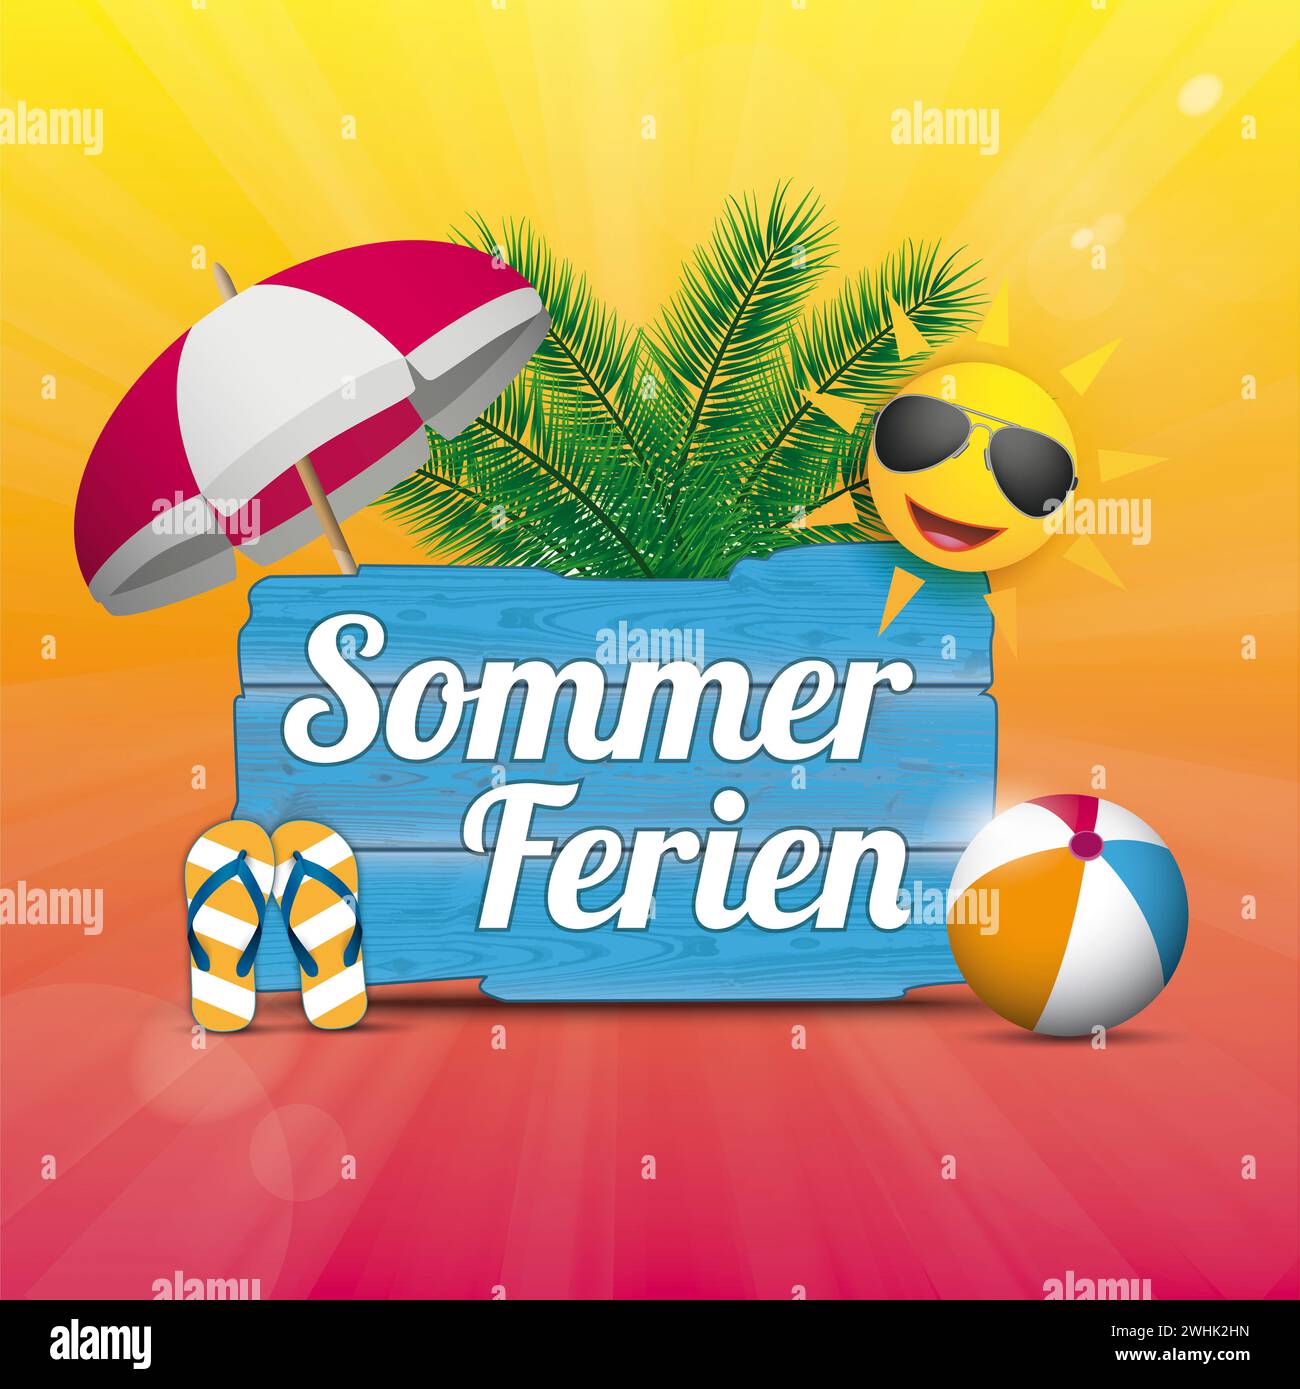 German text Sommerferien, translate Summer Holidays.  Eps 10 vector file. Stock Photo